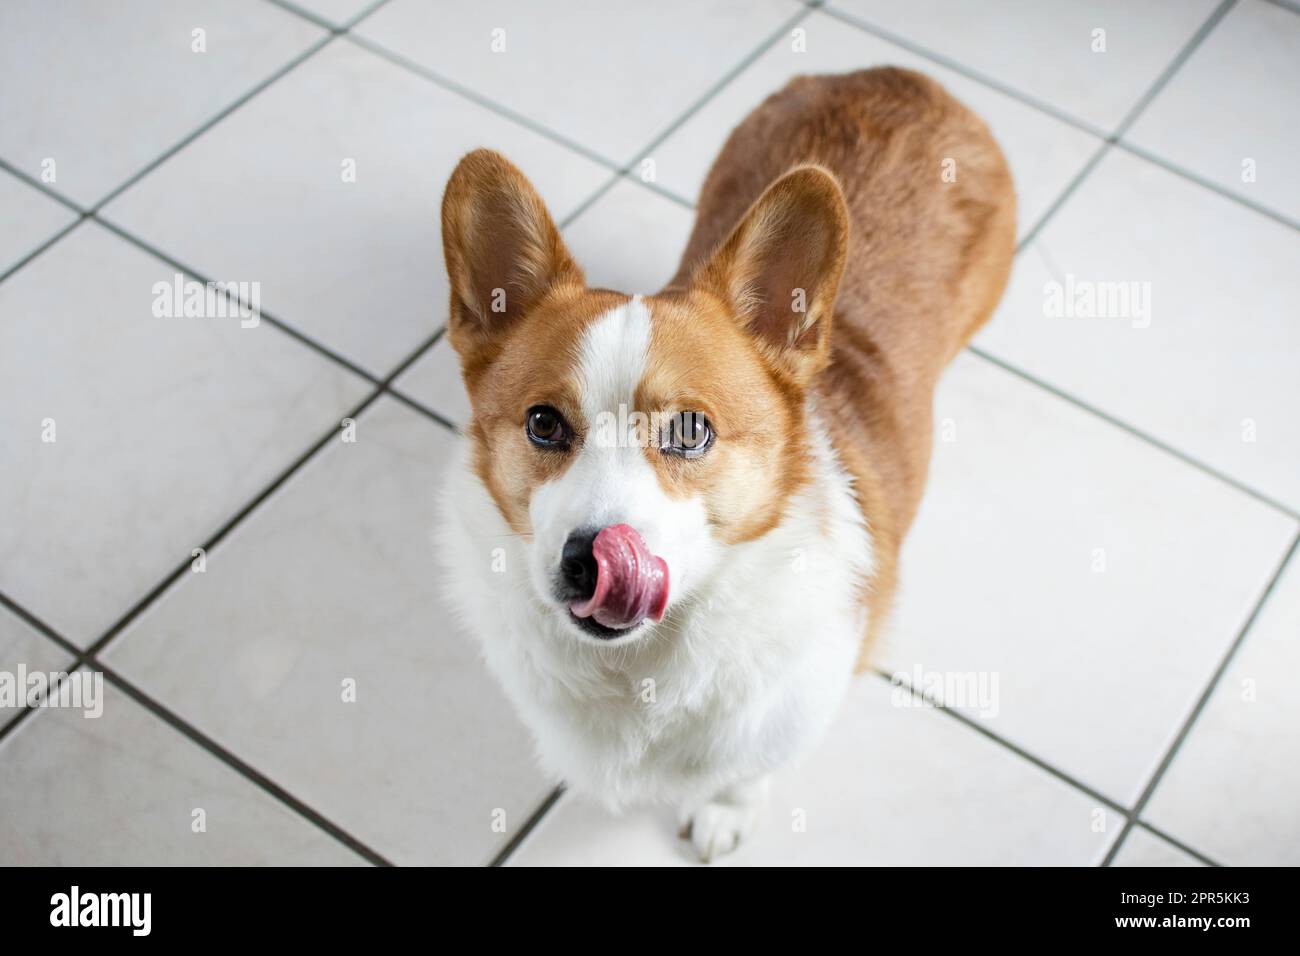 Cute Welsh Pembroke Corgi licking its nose. dog with tongue out. Tongue sticking out. Stock Photo